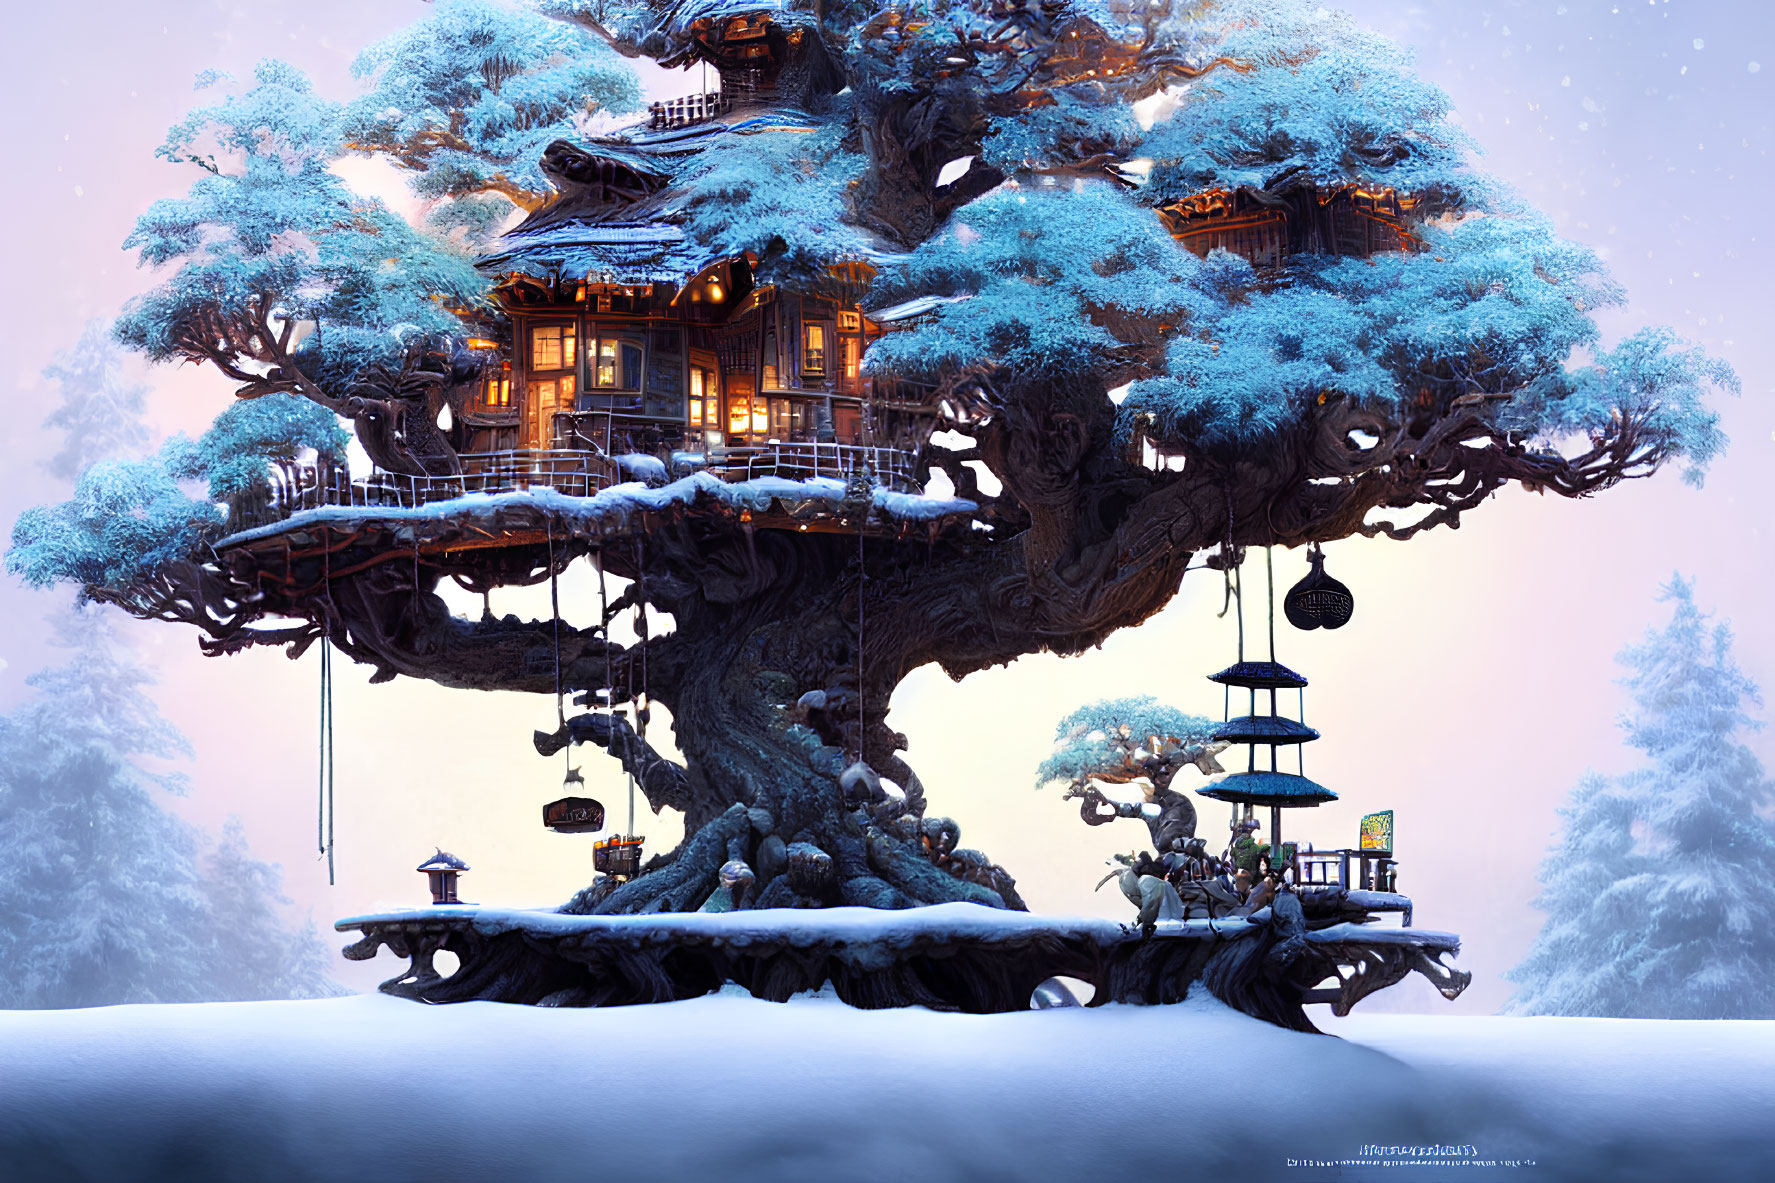 Snow-covered treehouse with glowing lanterns in twilight winter scene